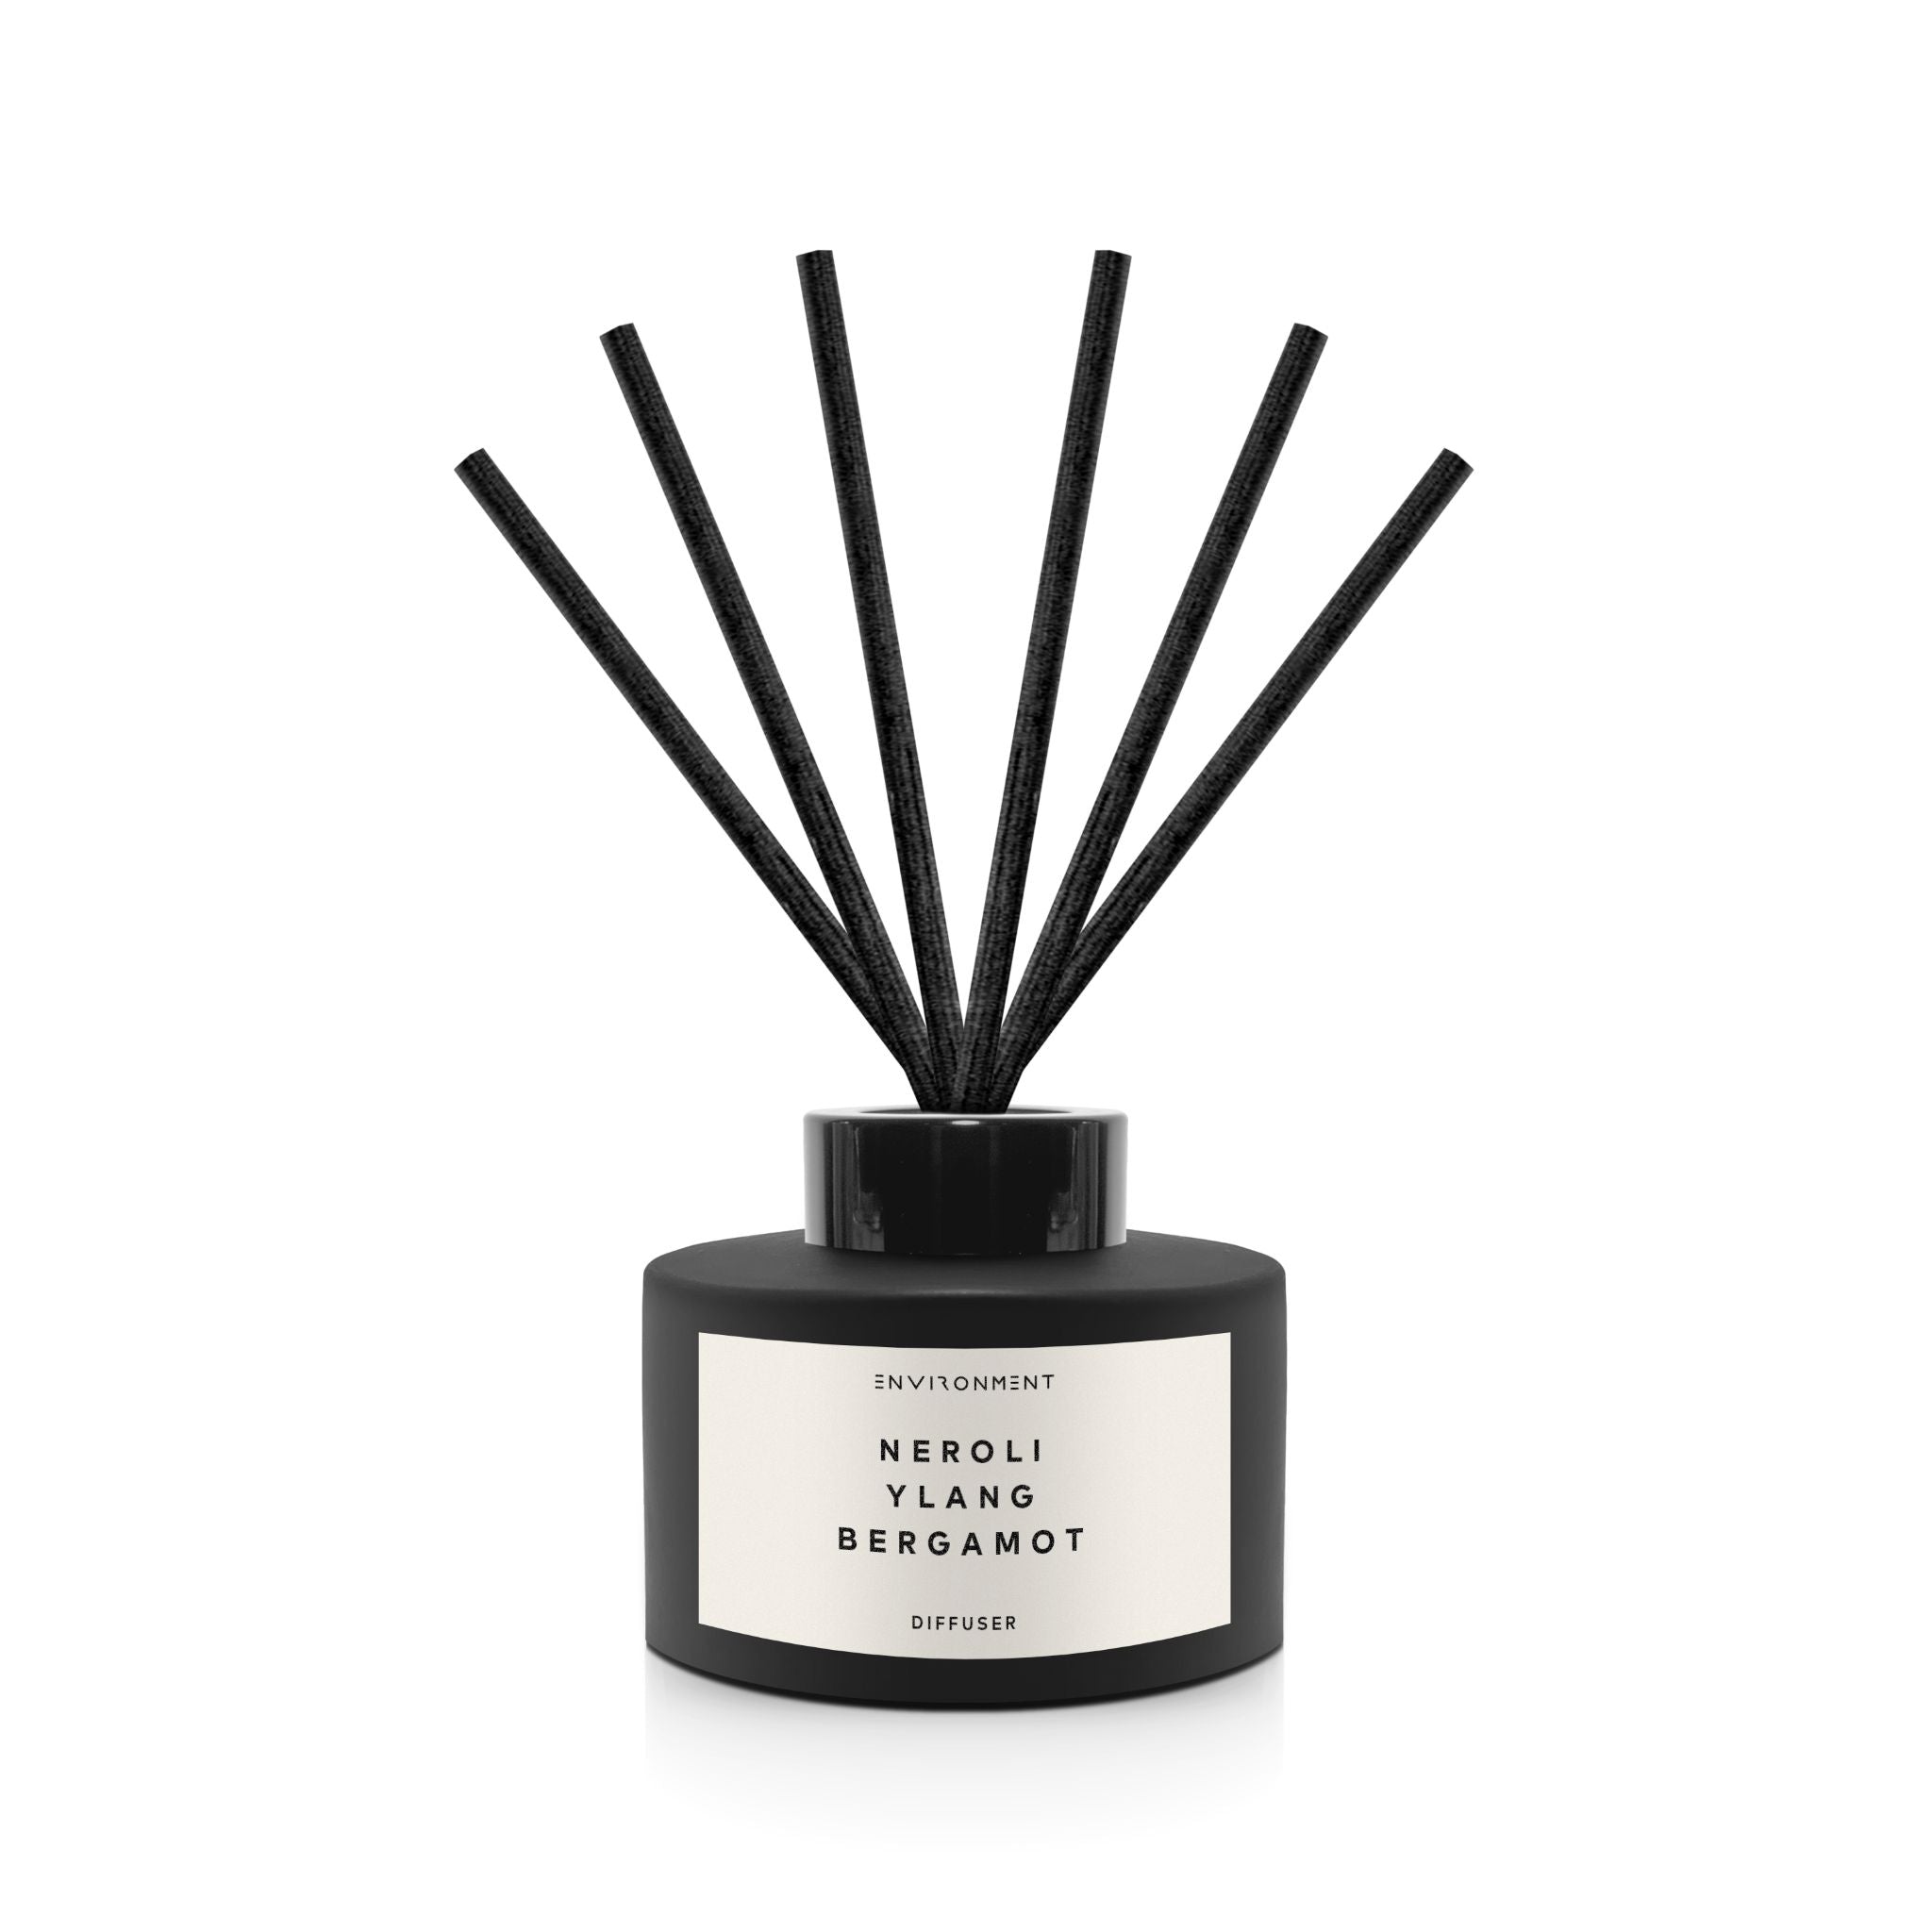 Neroli | Ylang | Bergamot 200ml Diffuser and 8oz Candle Gift Pack (Inspired by Chanel #5®)